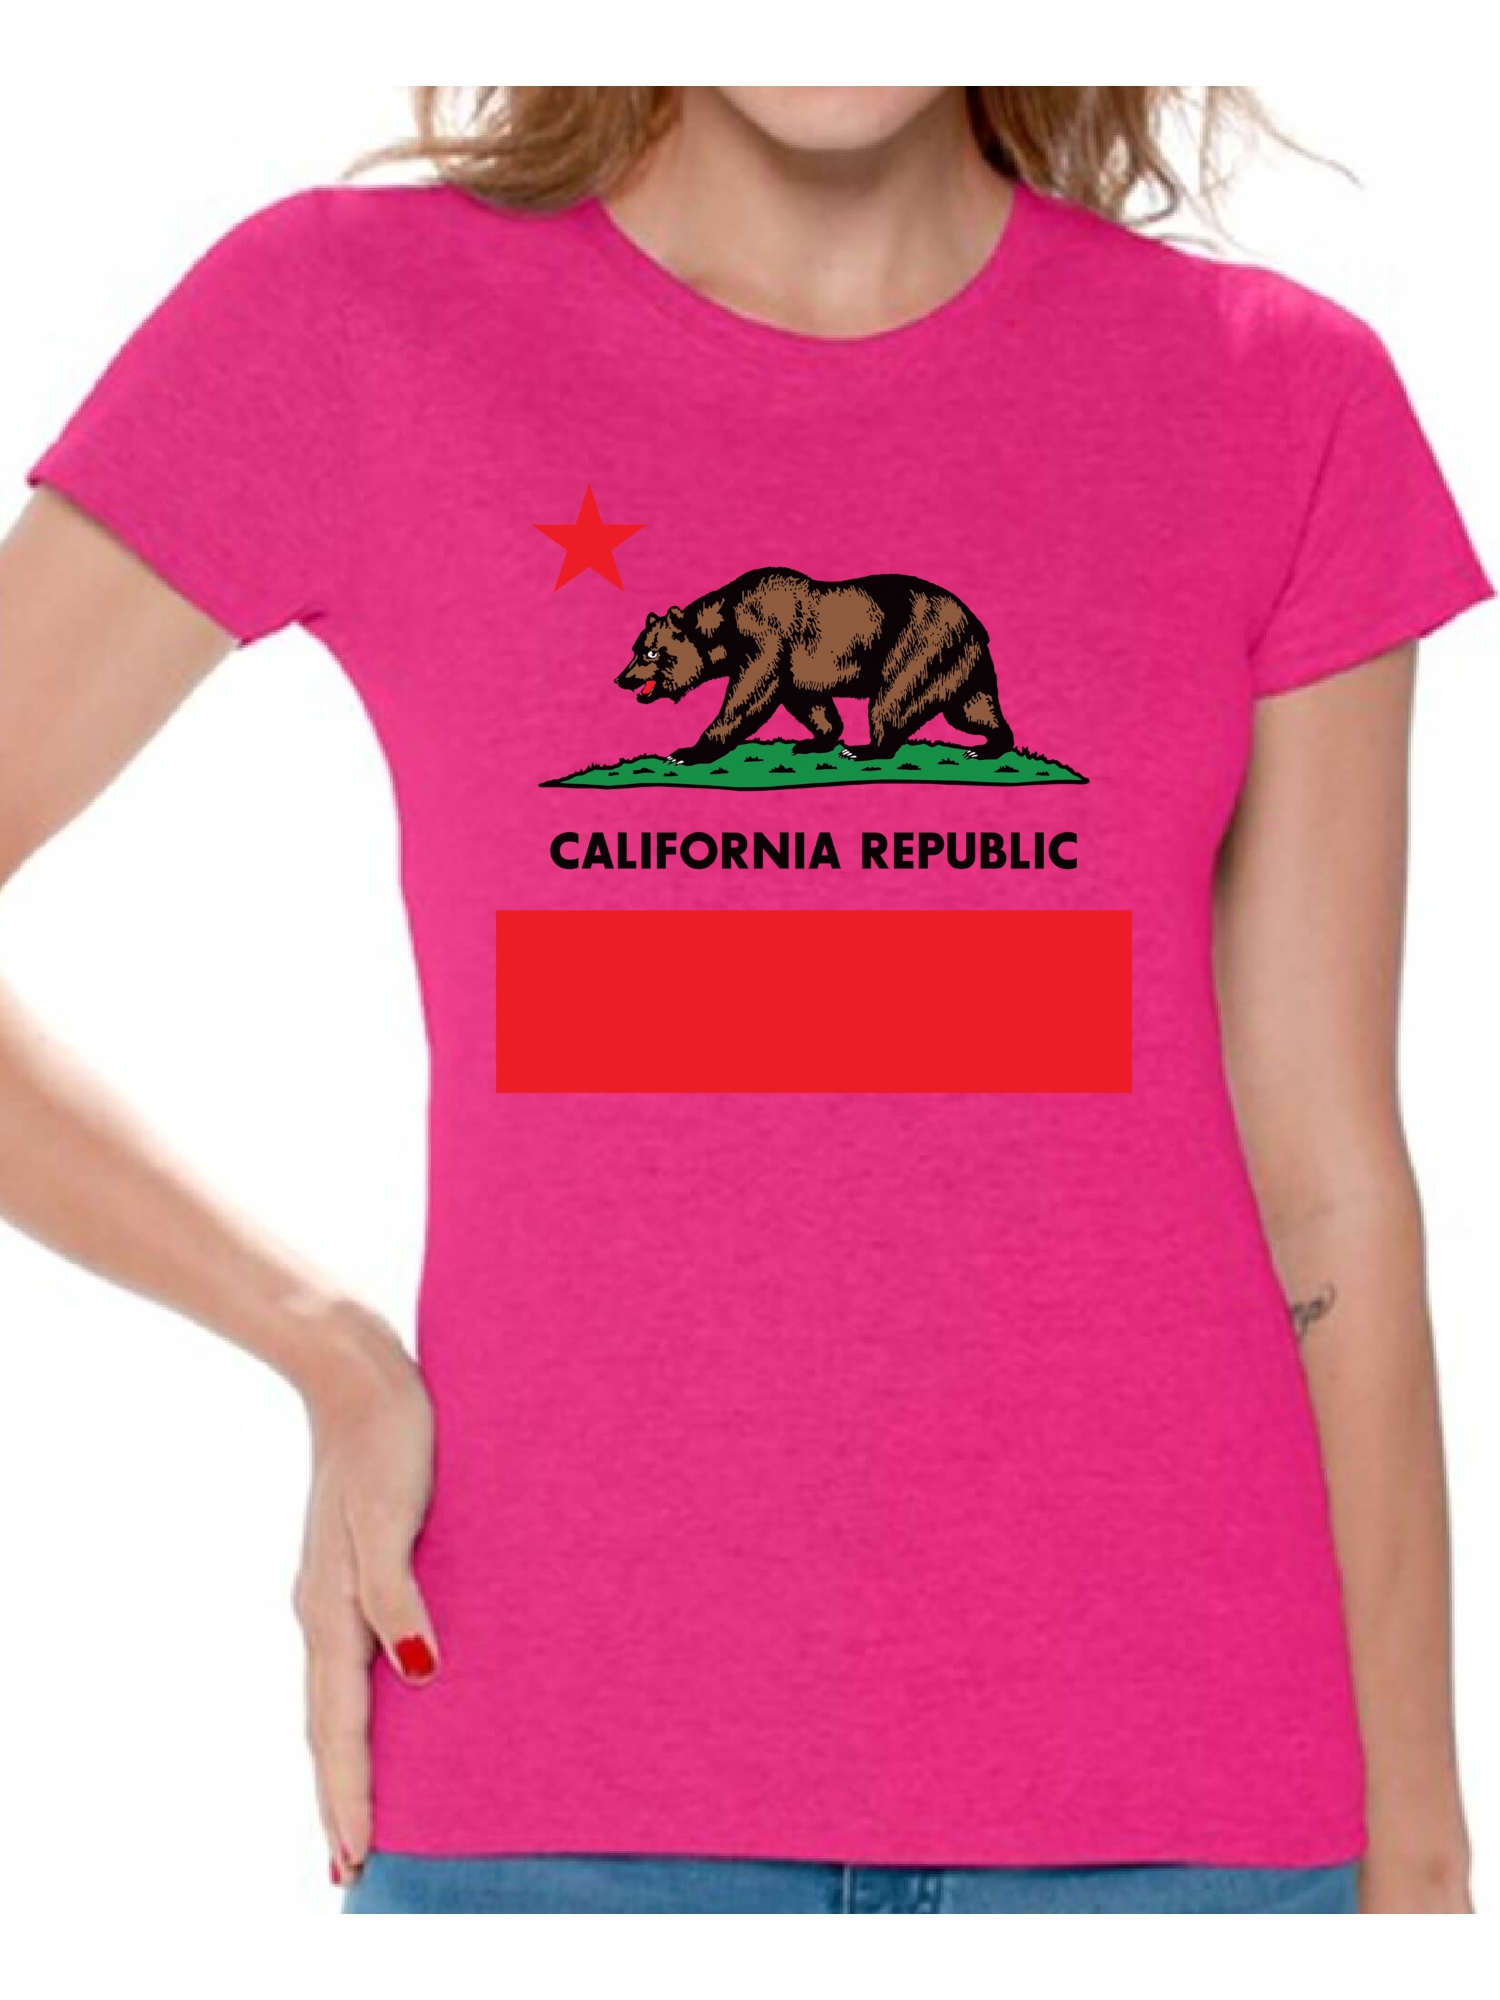 Awkward Styles California Republic Shirt for Women California State Women T-shirt United States of America Retro California Women T shirt California Gifts Summer Tshirt for Women Made in the USA - image 1 of 4